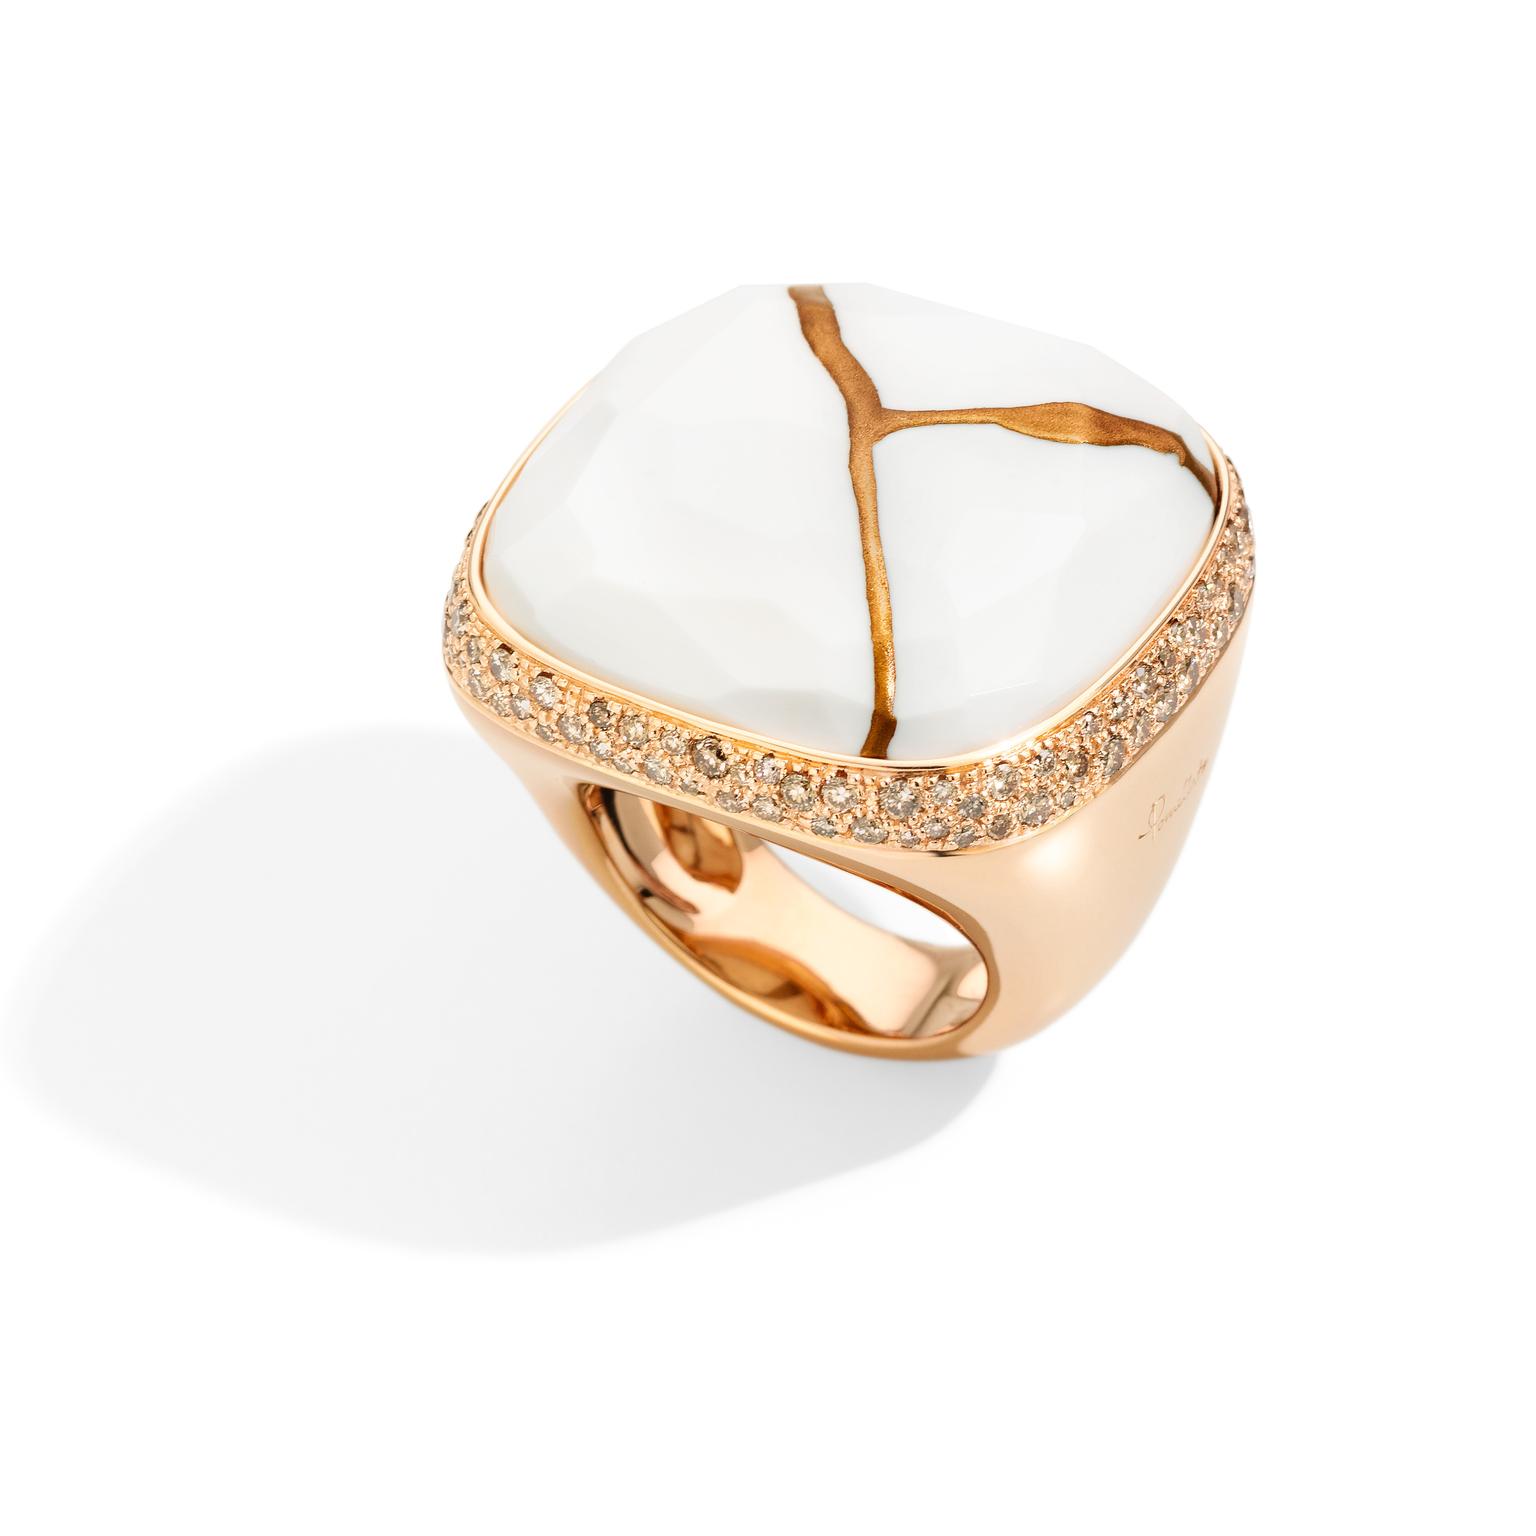 Pomellato Kintsugi Collection_ring in rose gold with kogolong and brown diamonds